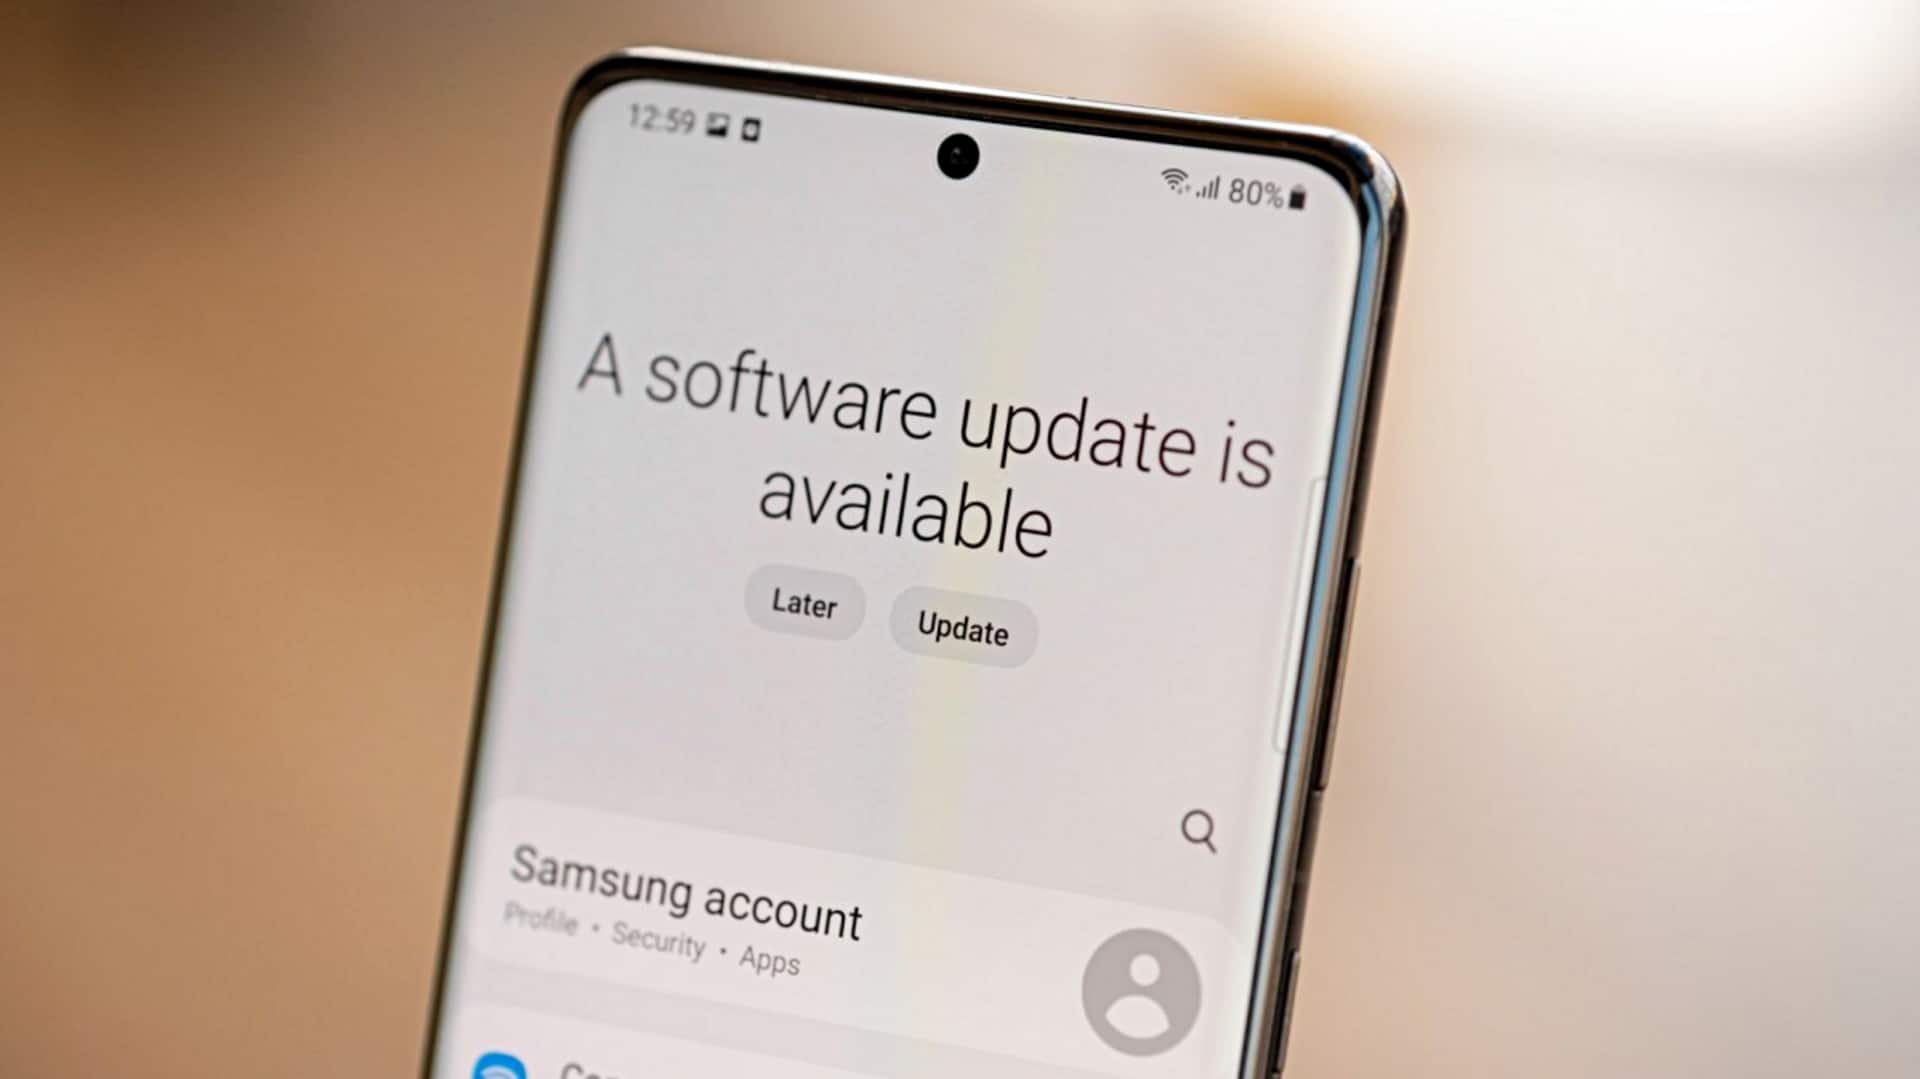 Samsung finally incorporates 'Seamless Updates' feature: How it works